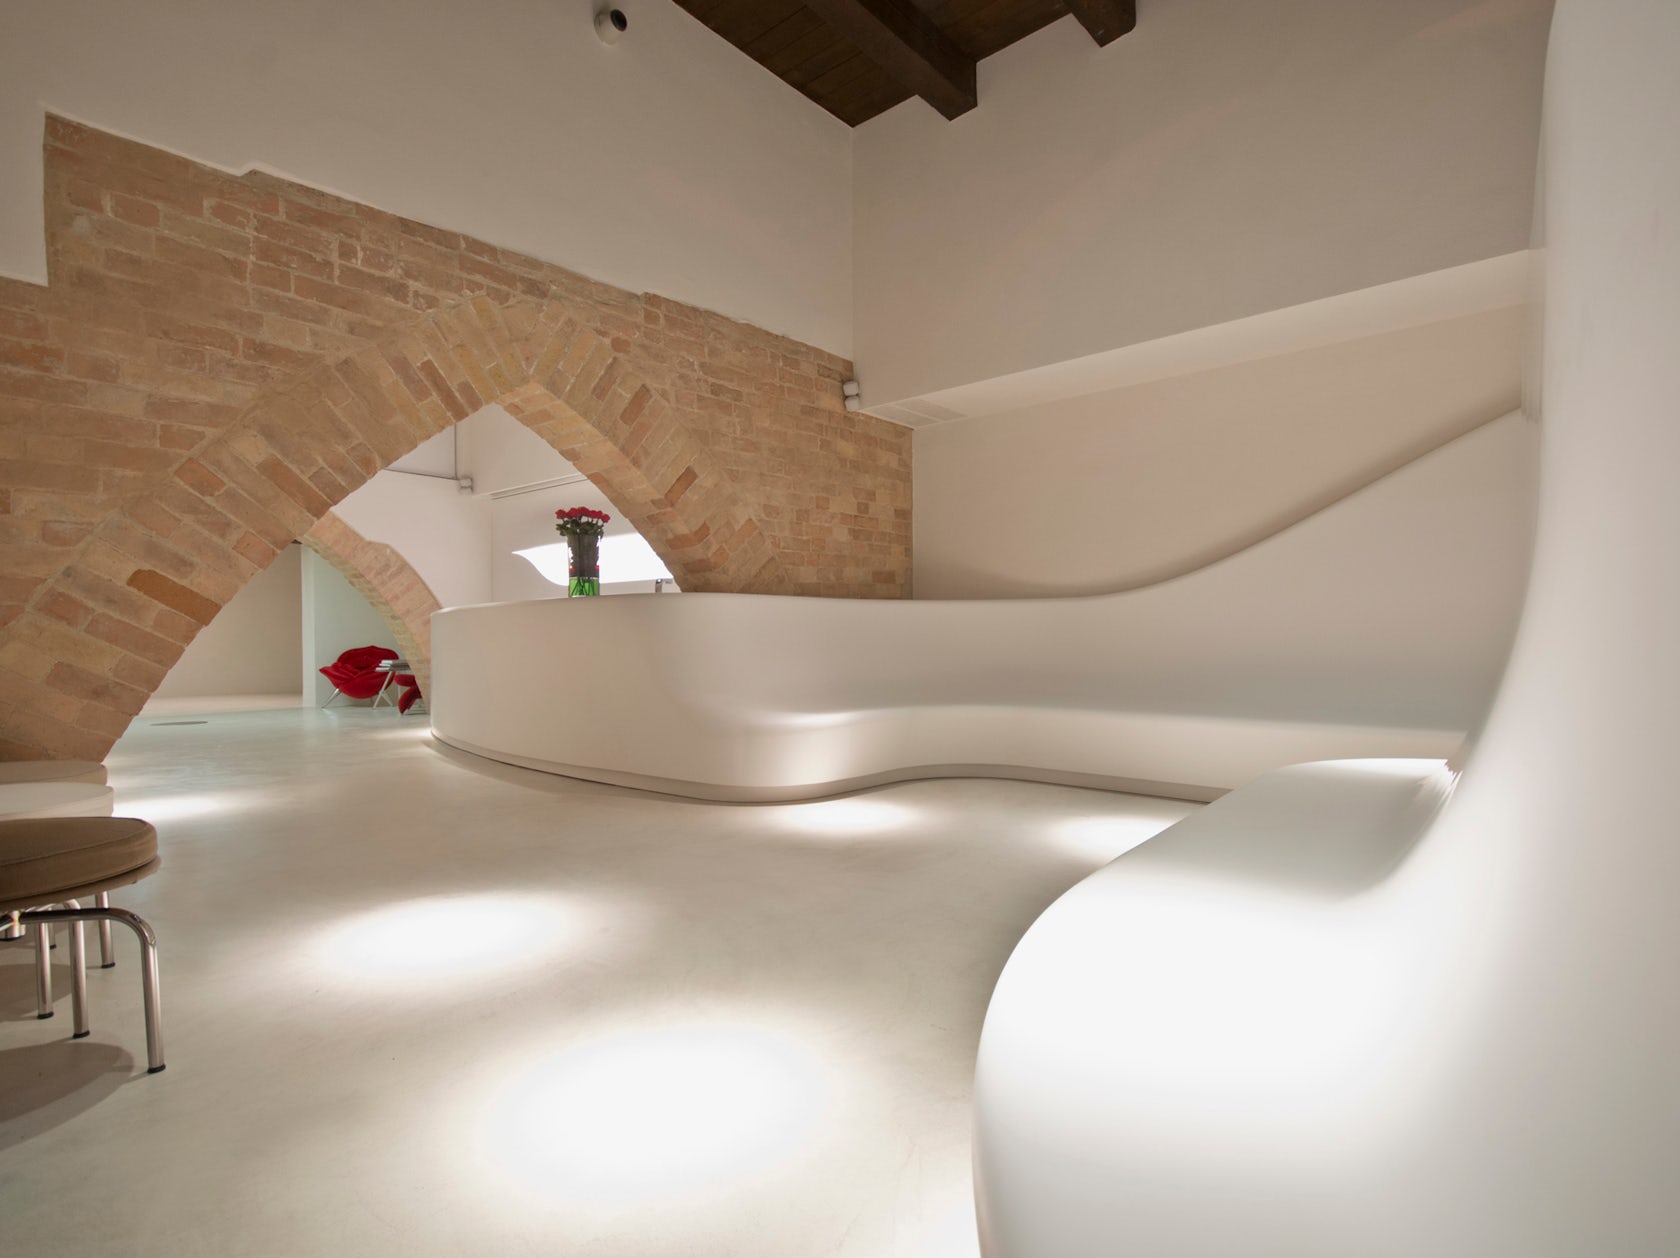 AUGEO Art Space, Spa and Gym - Architizer